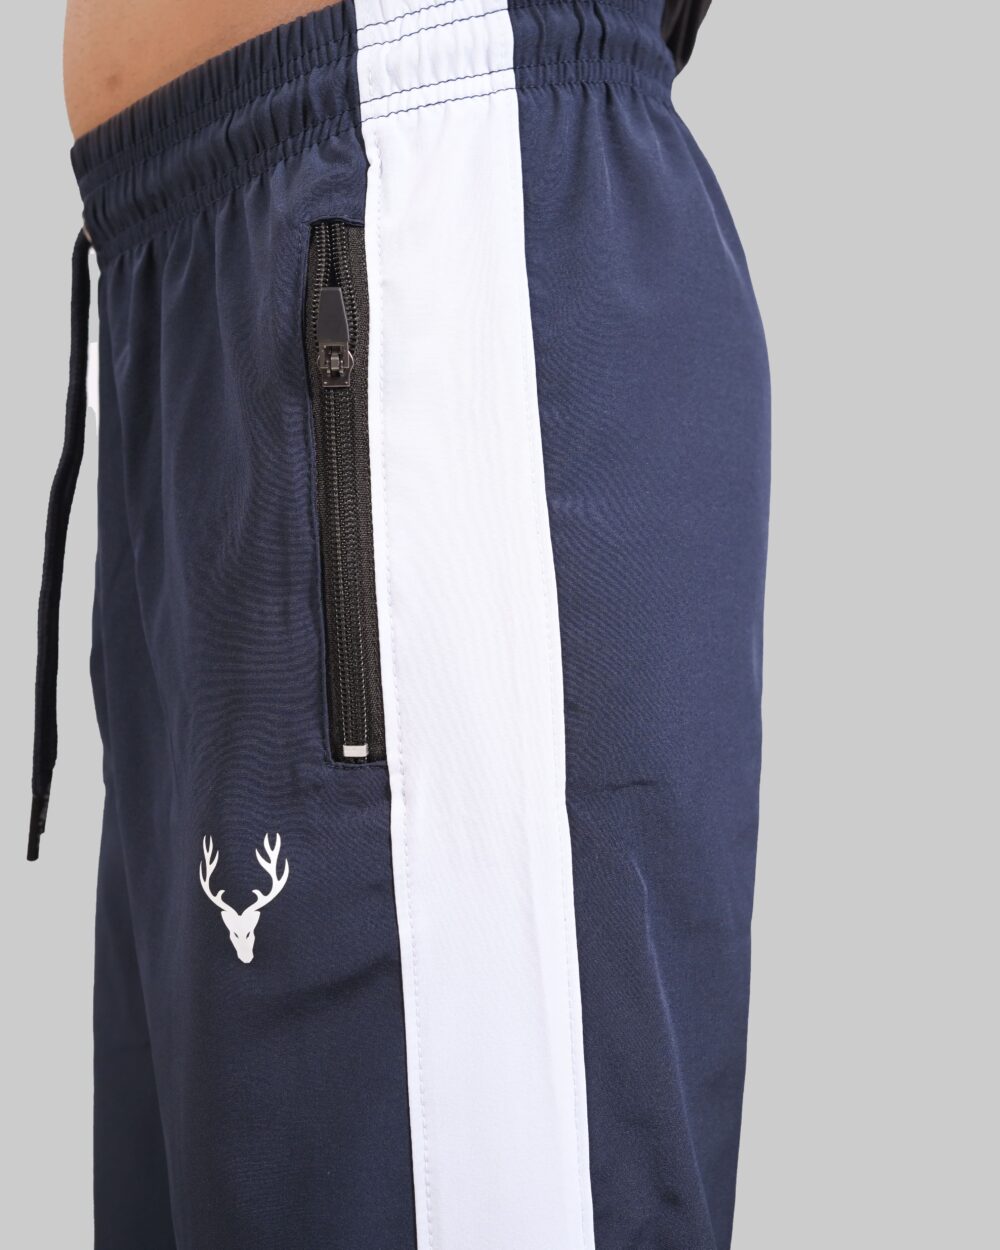 SG Loose Fit Trouser 2.0 (NAVY BLUE & WHITE)